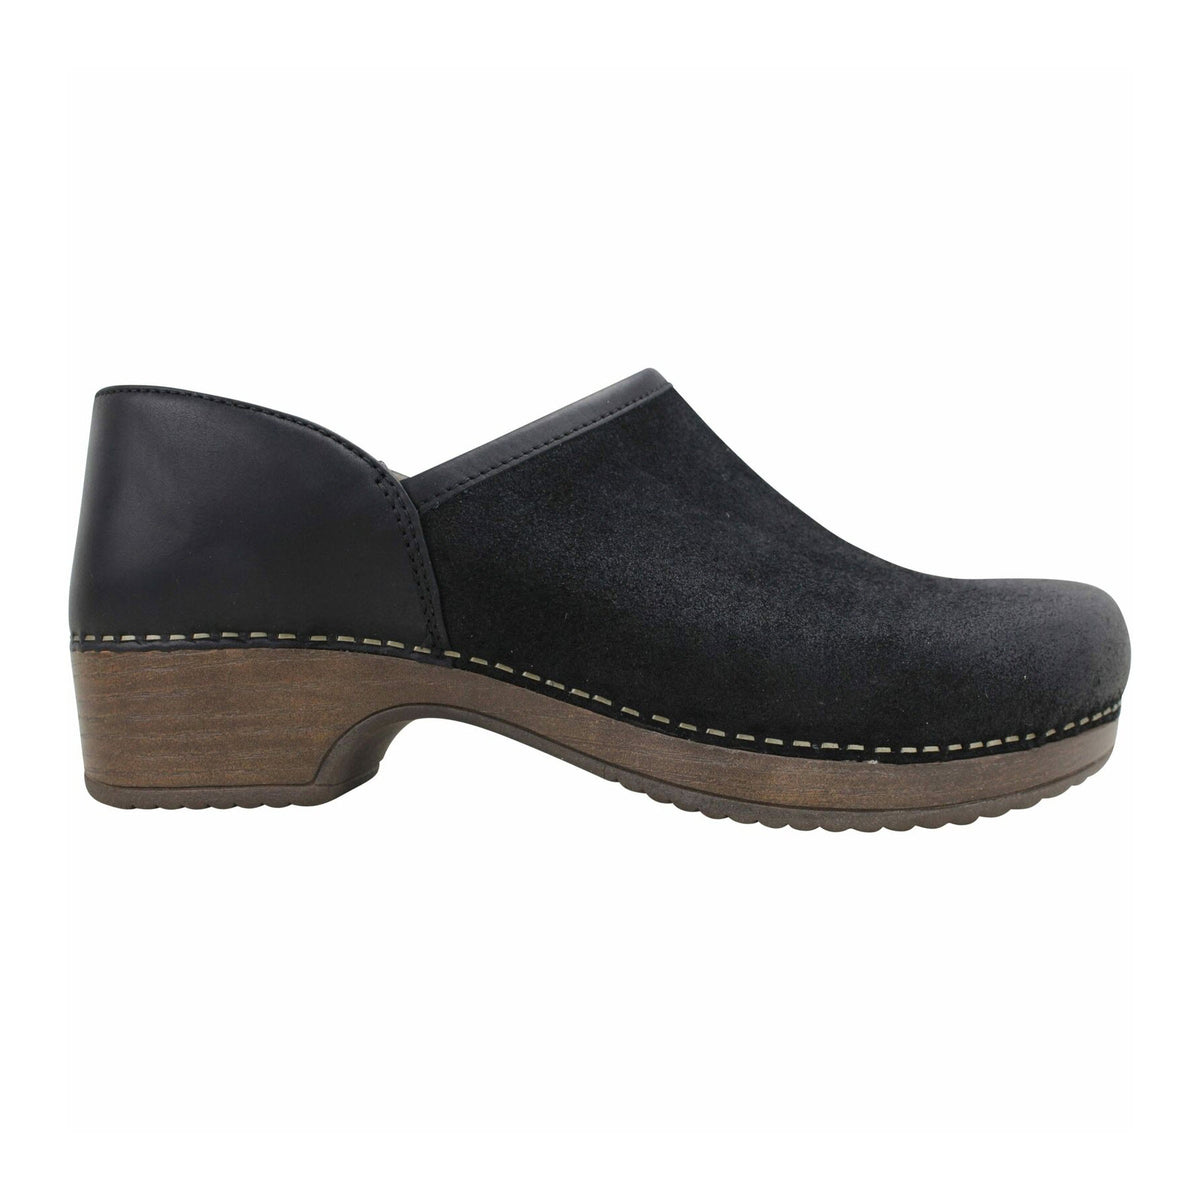 Dansko black burnished suede slip-on shoe with a wooden sole and low heel, featuring Dansko Brenna&#39;s signature stain resistance.